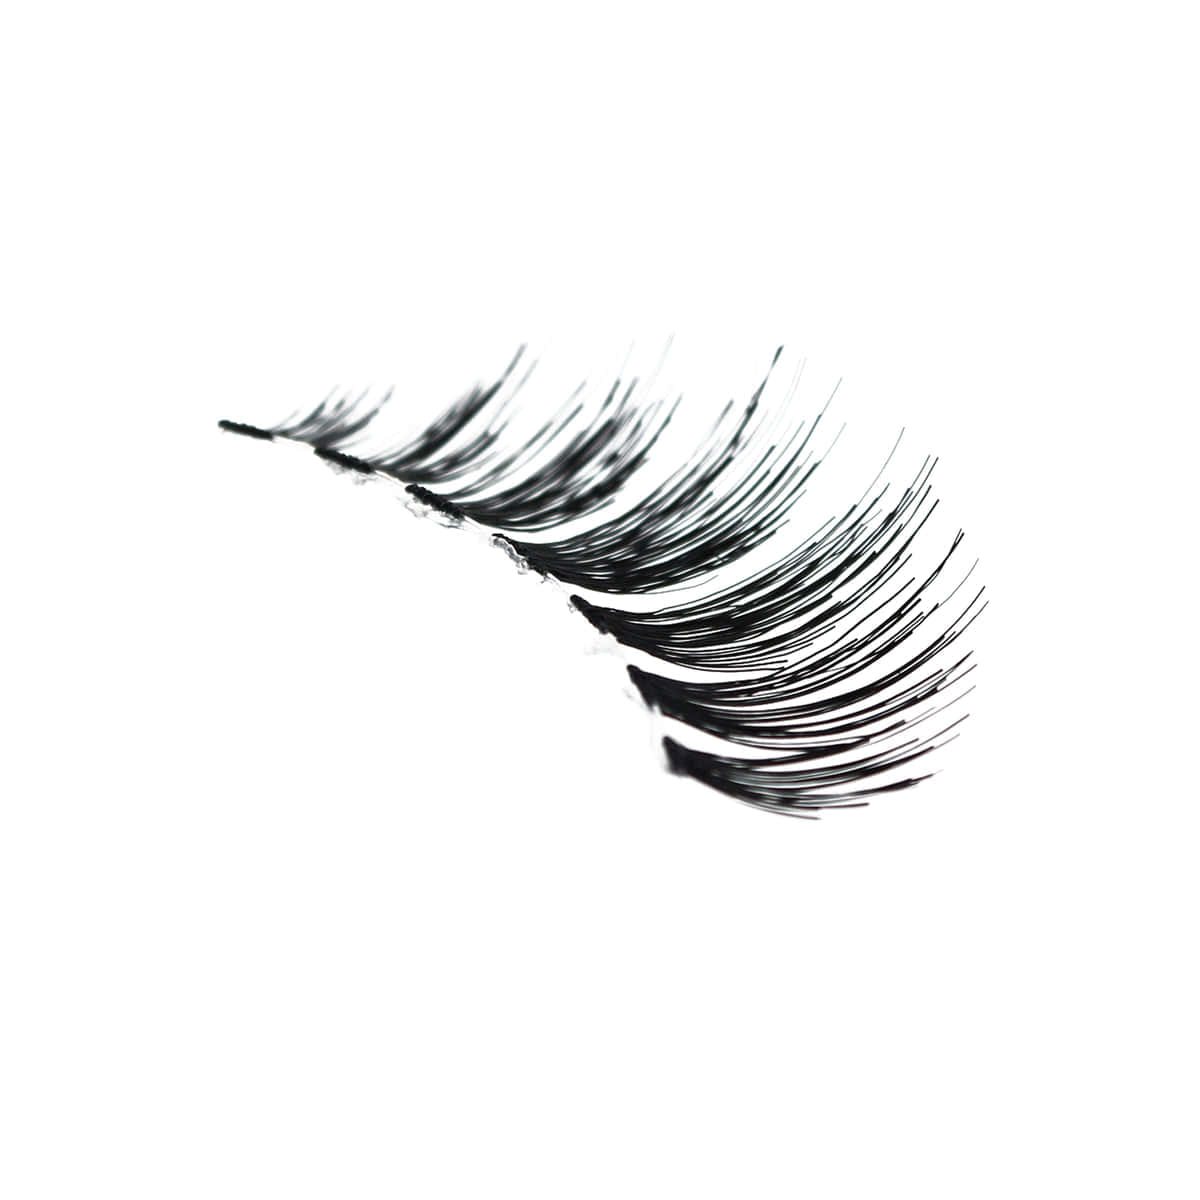 A Pair Of Black False Lashes On A White Background